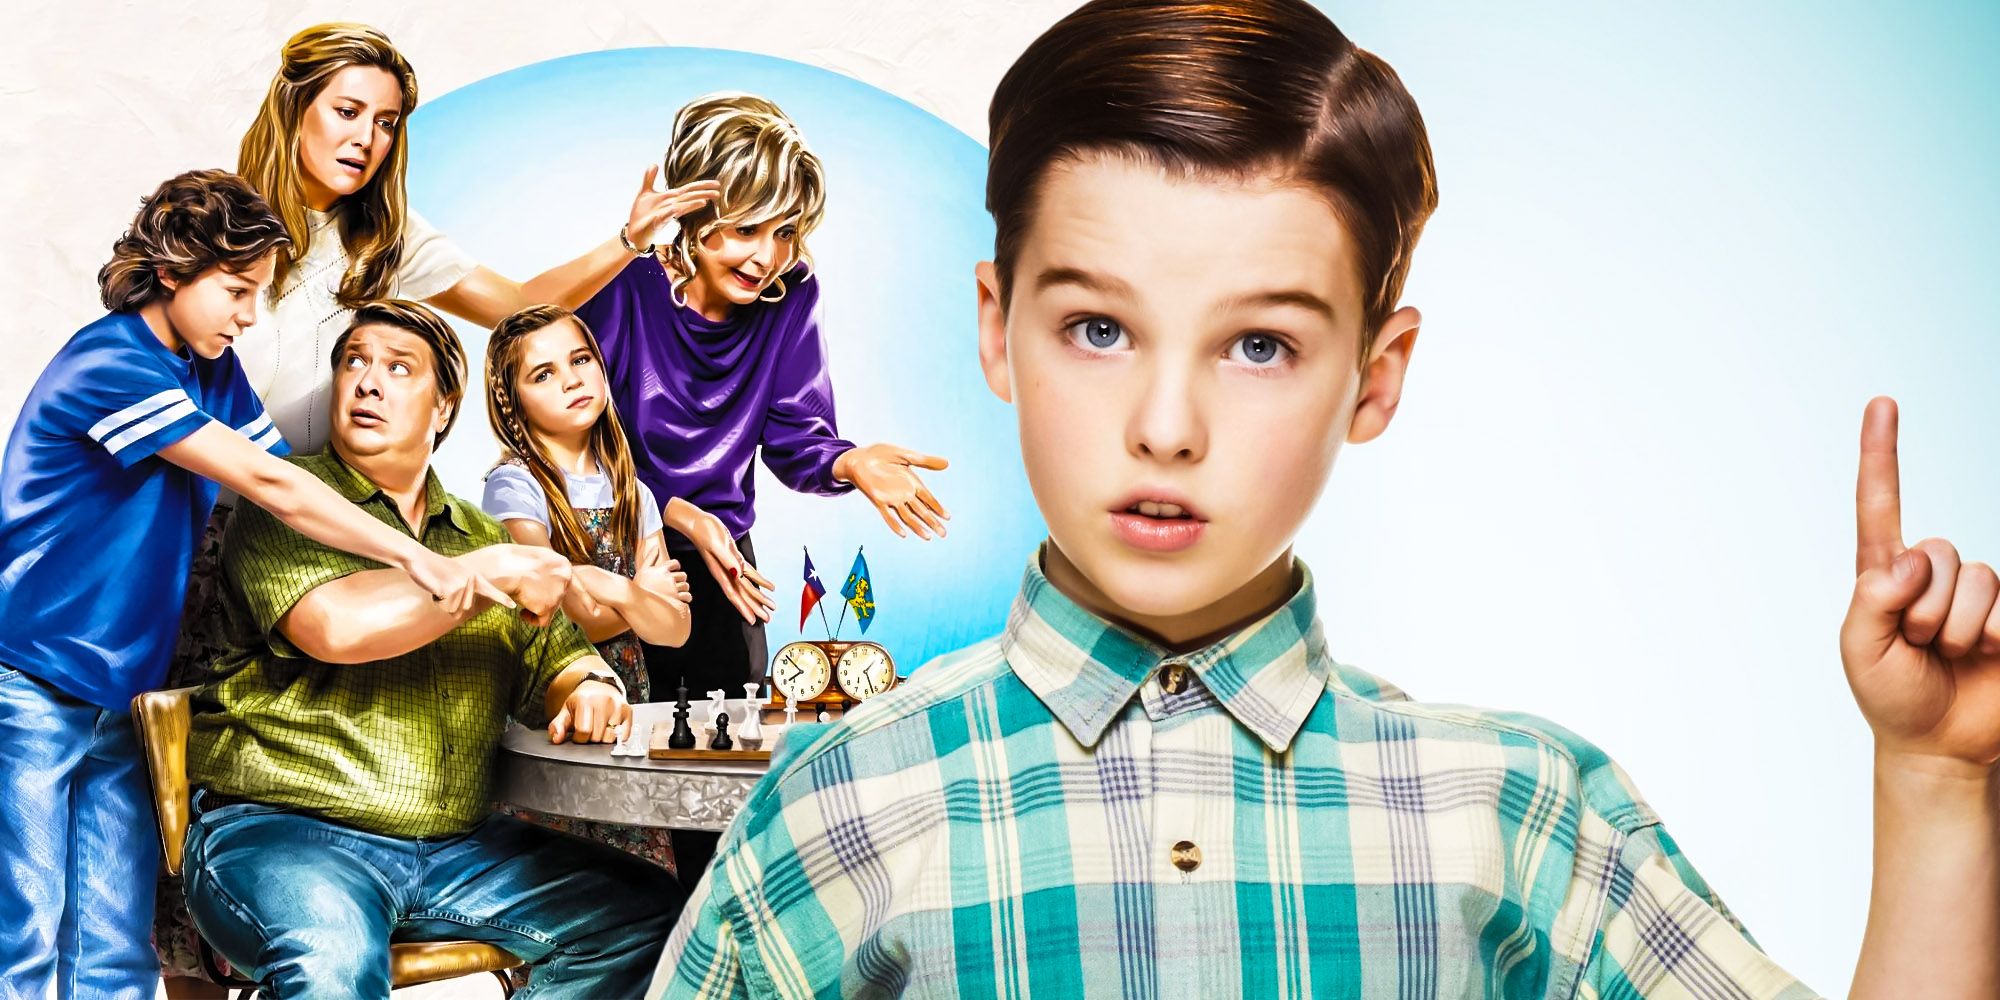 Why theres no Young sheldon this week